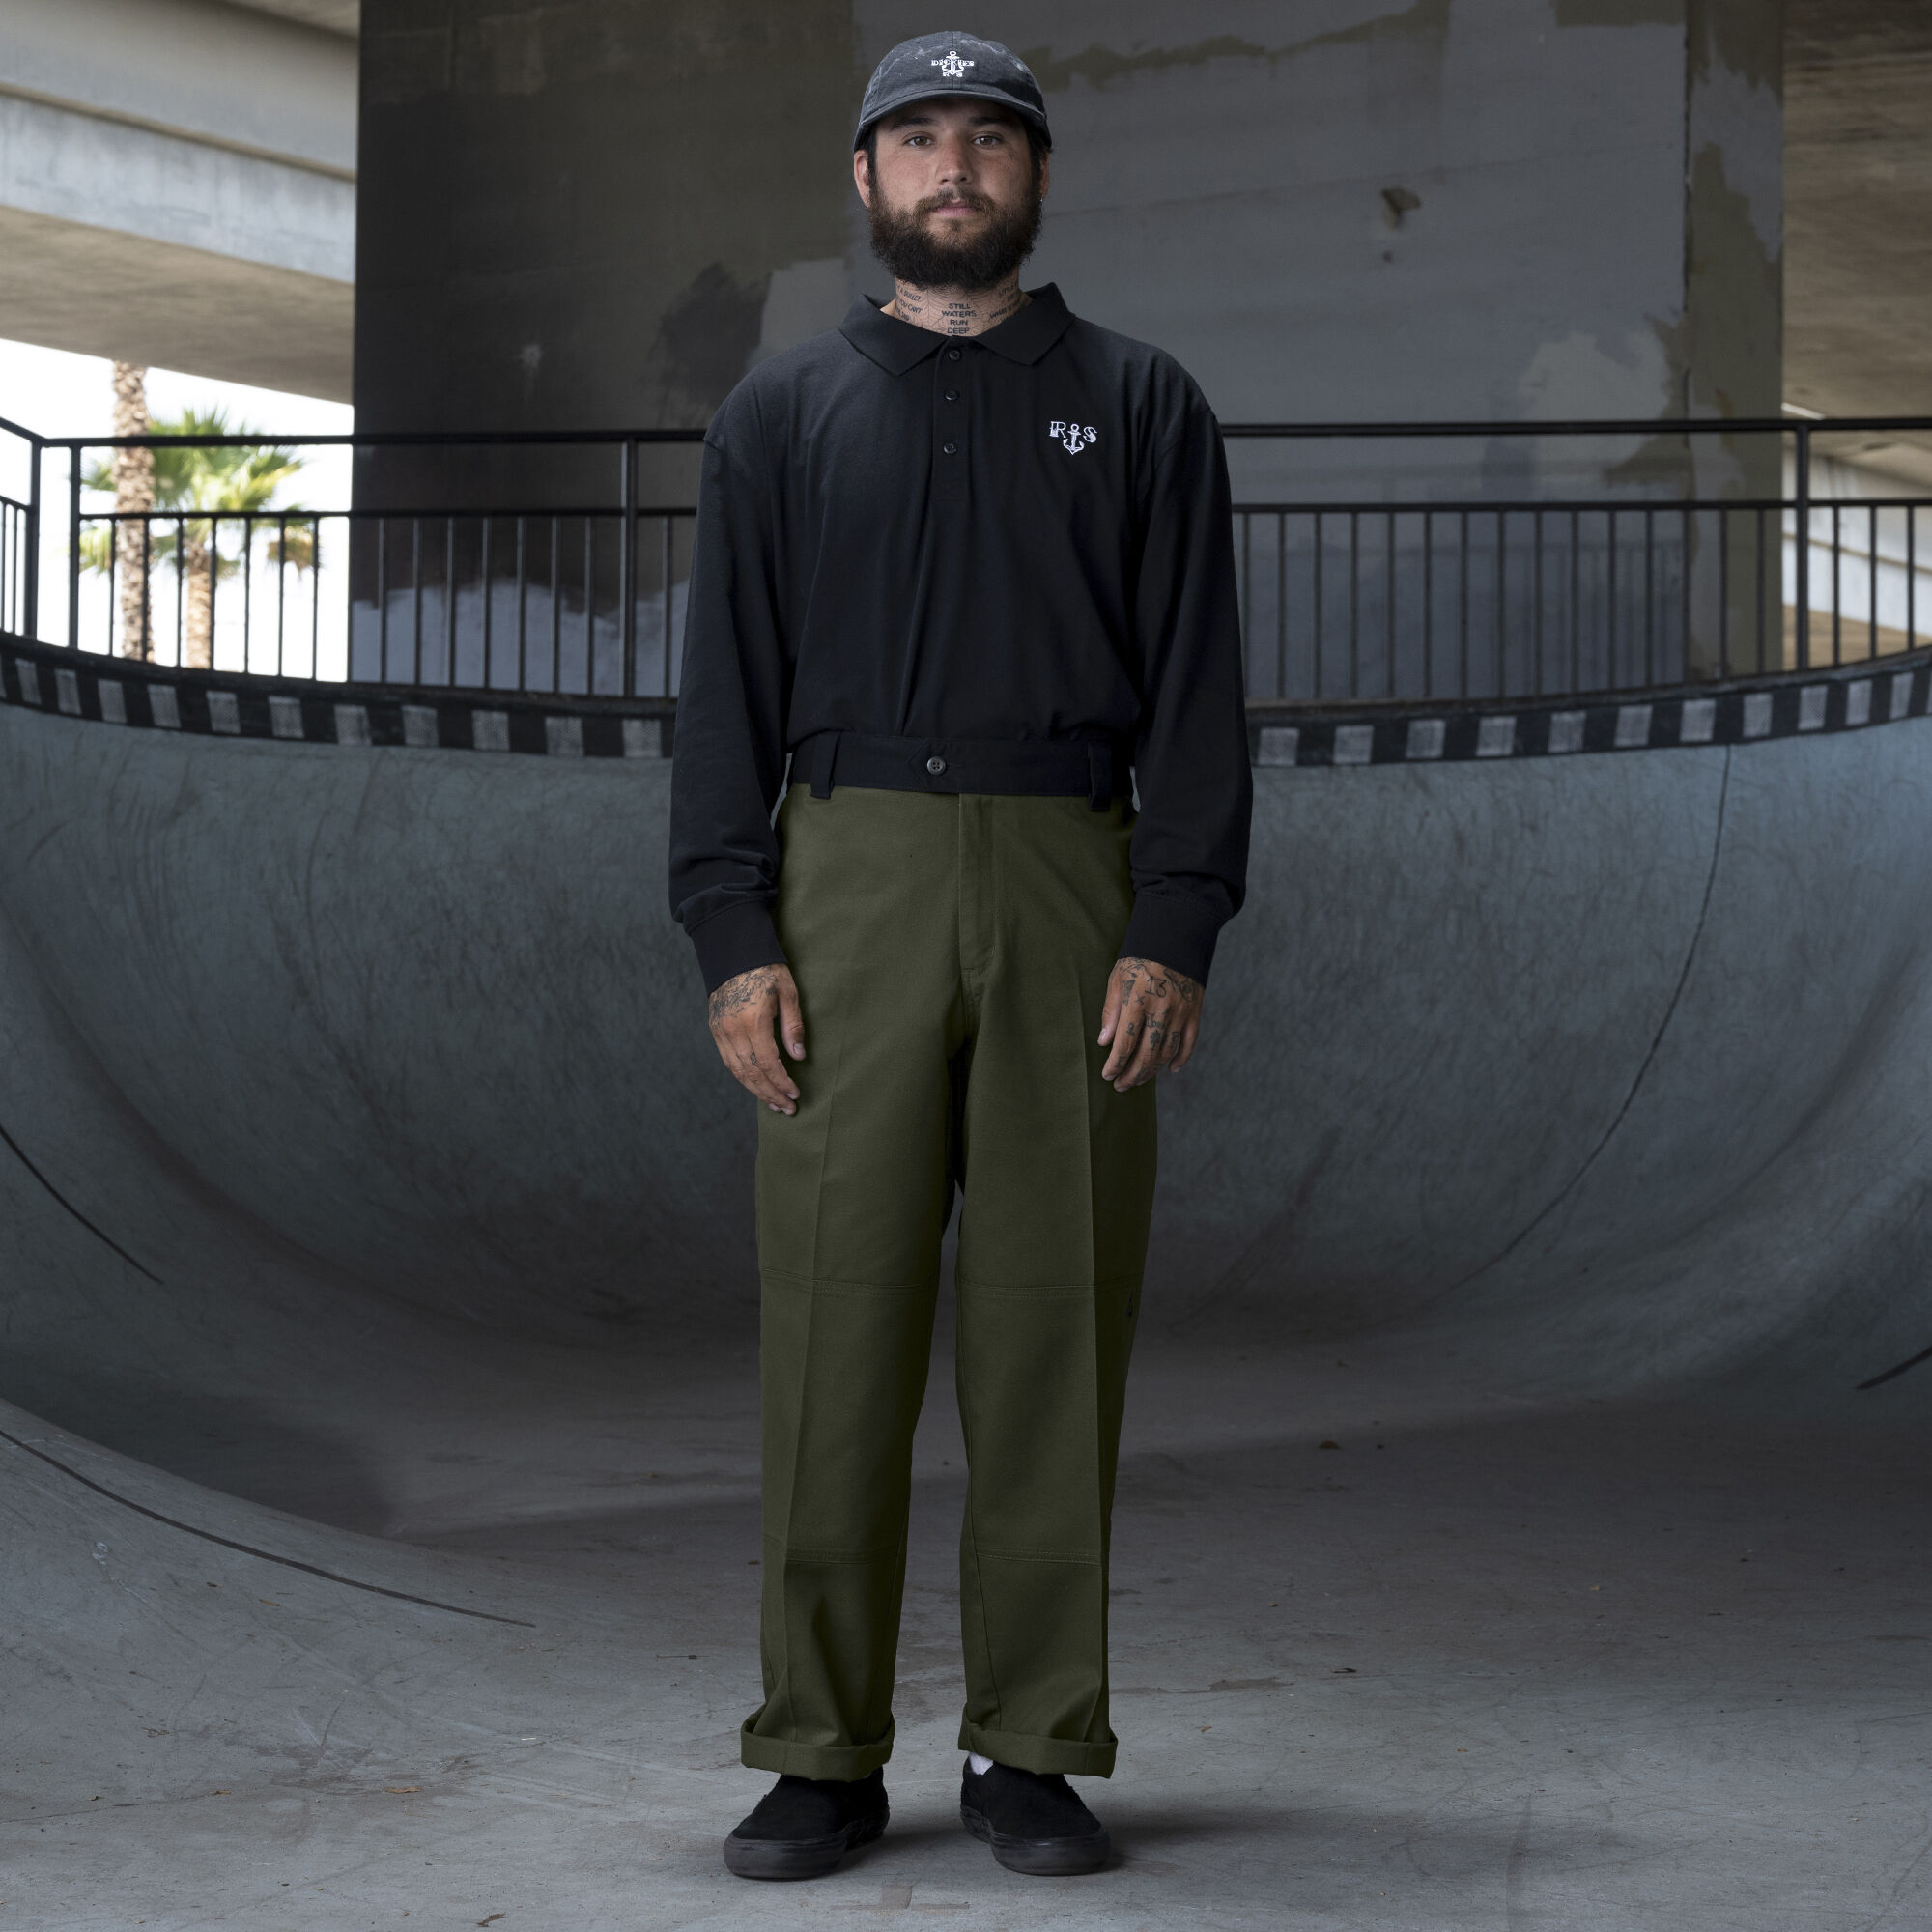 Ronnie Sandoval Loose Fit Double Knee Pants